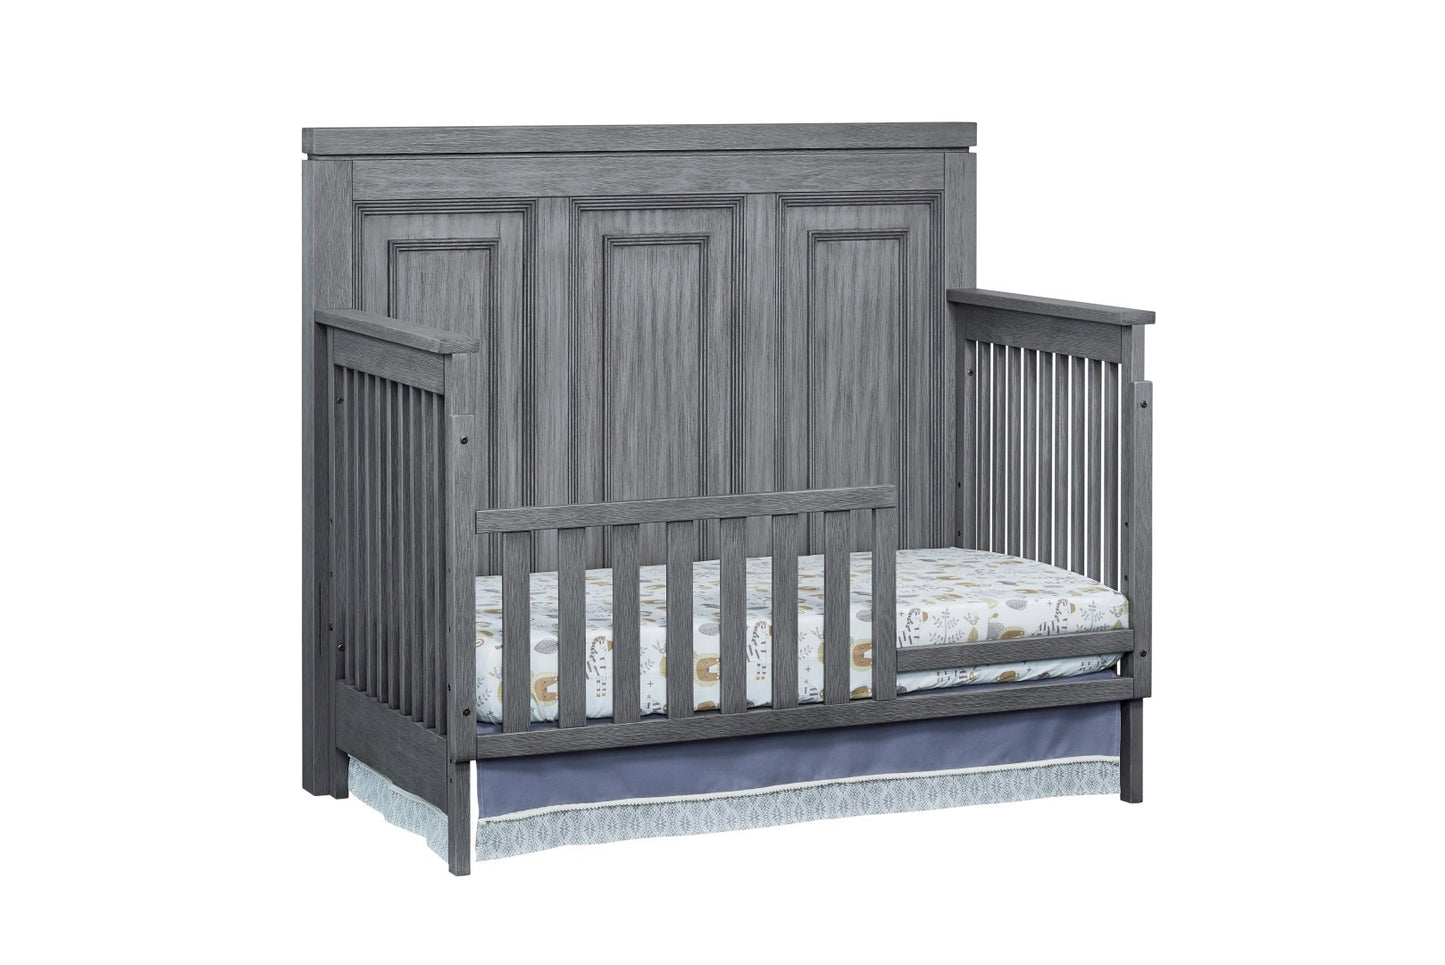 Manchester 4 in 1 Convertible Crib